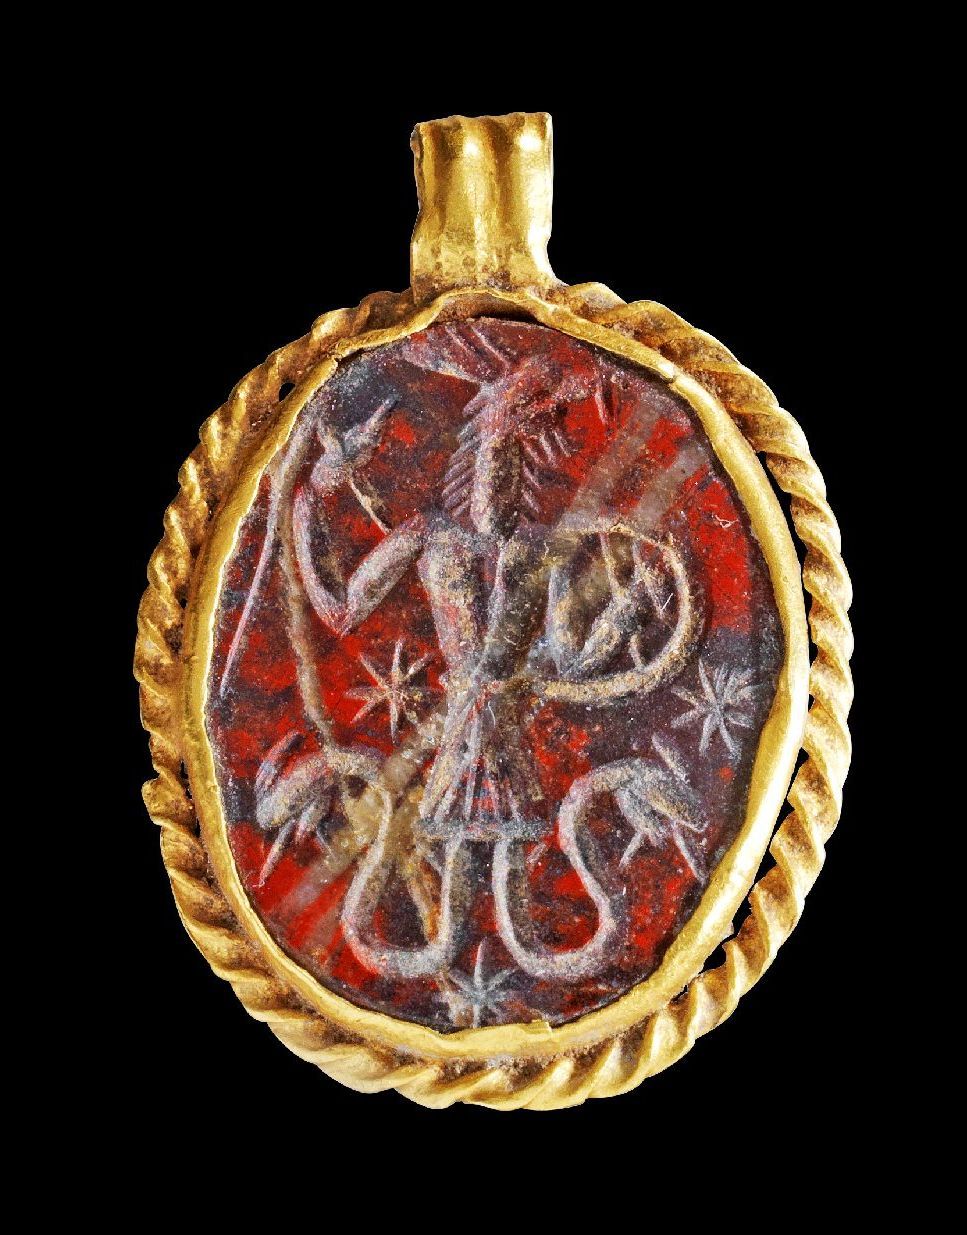 archaicwonder: “ Roman Magic Abraxas Amulet, 2nd-3rd Century AD Abraxas was an Egyptian Gnostic solar deity. Amulets and seals bearing the figure of Abraxas were common in the second century AD, and were used as recently as the thirteenth century in...